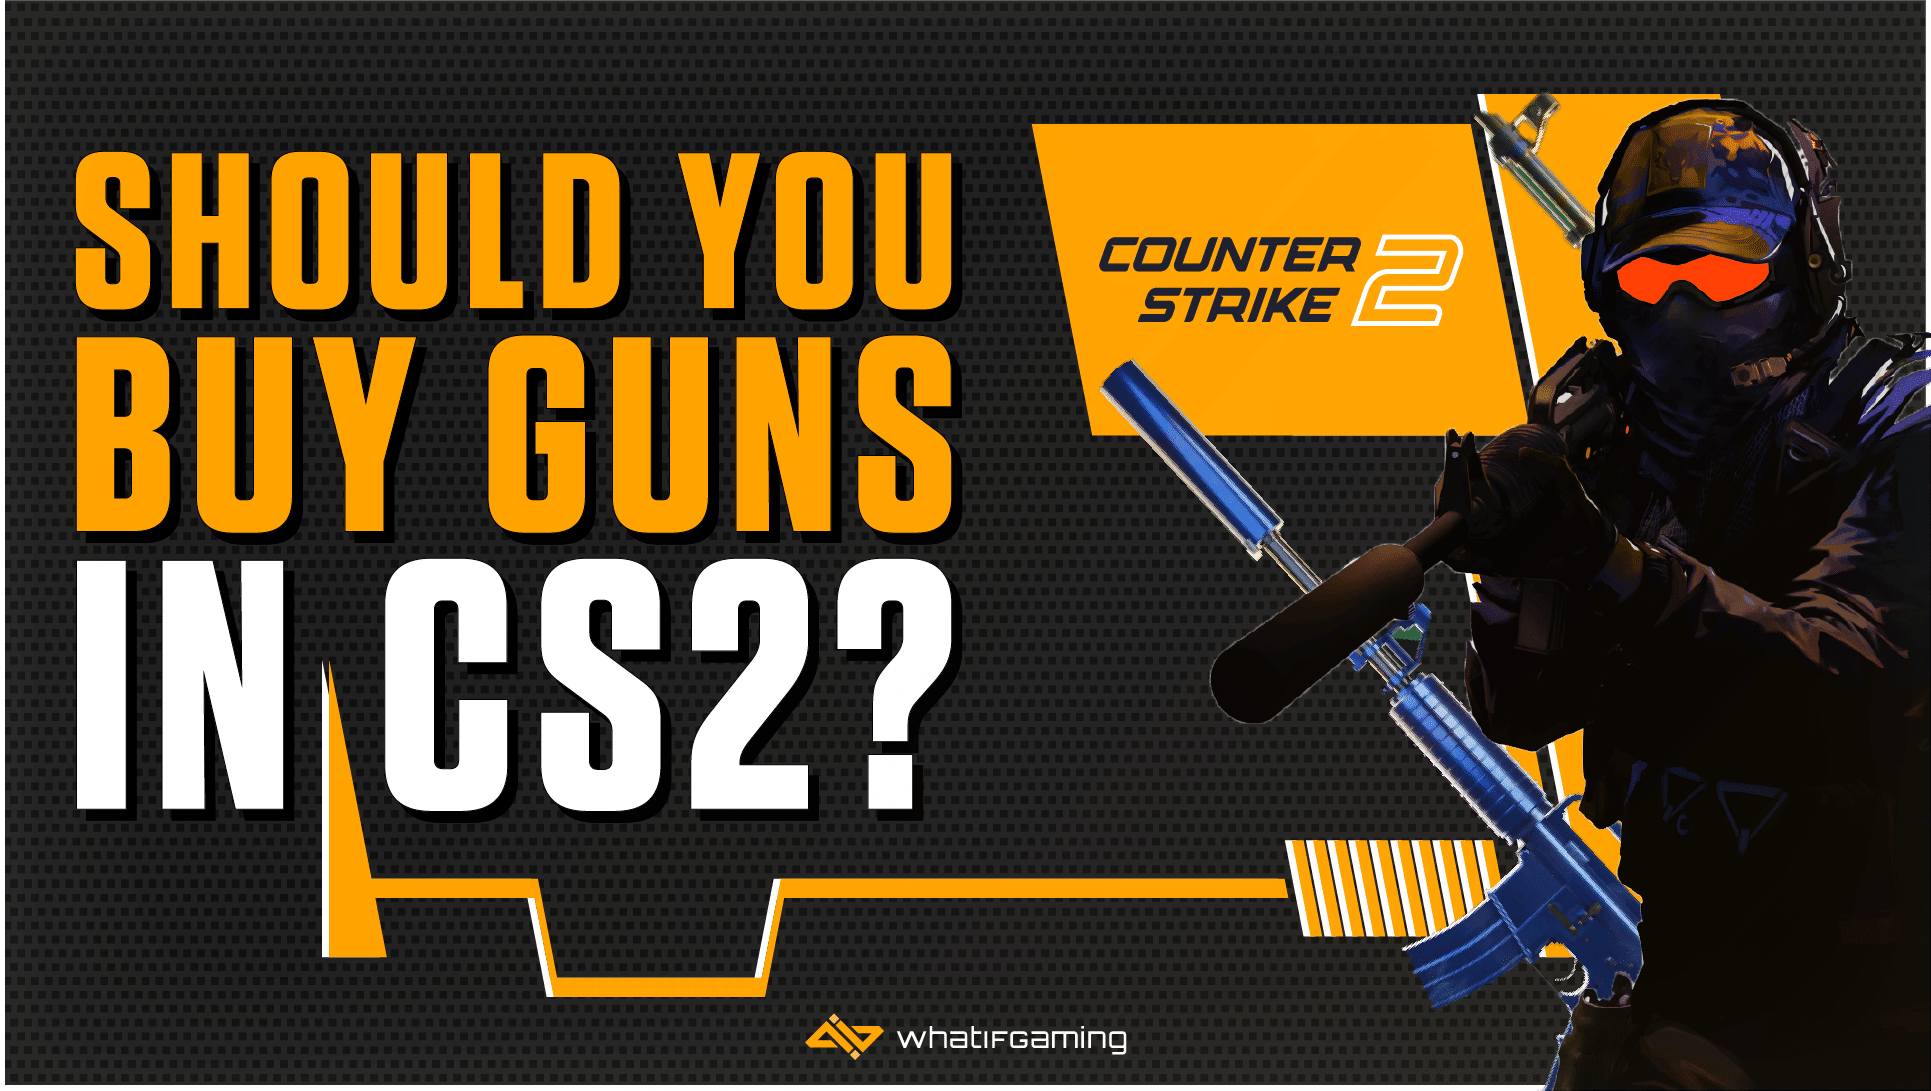 CS2 release date, skins, trailers, and Counter-Strike 2 news